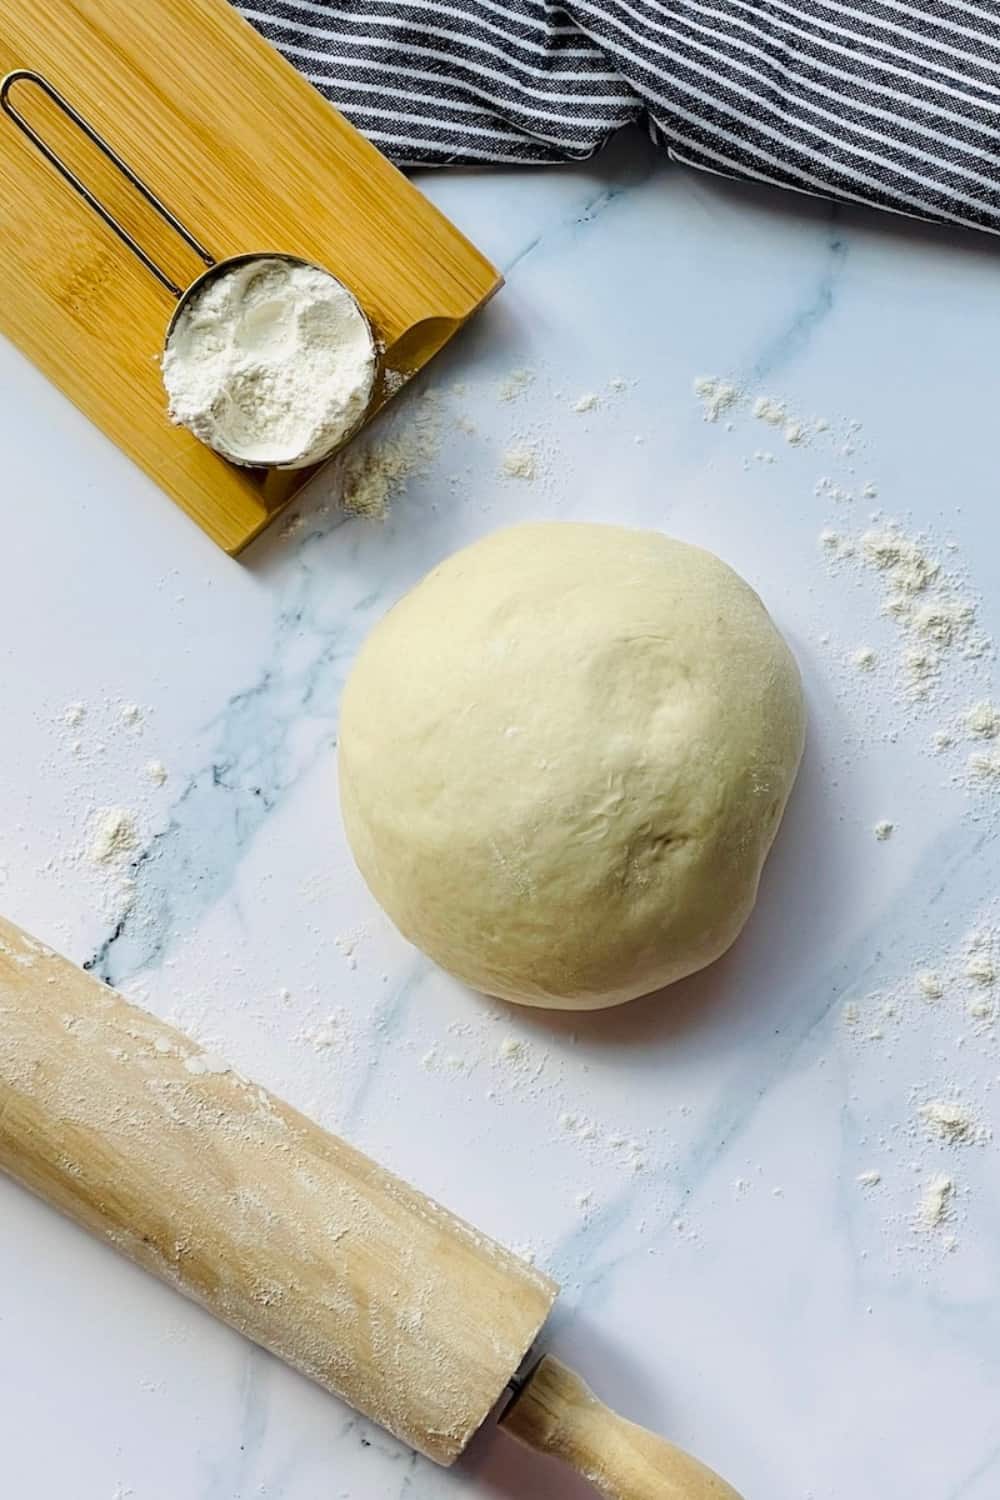 pizza dough ball rising on a white surface